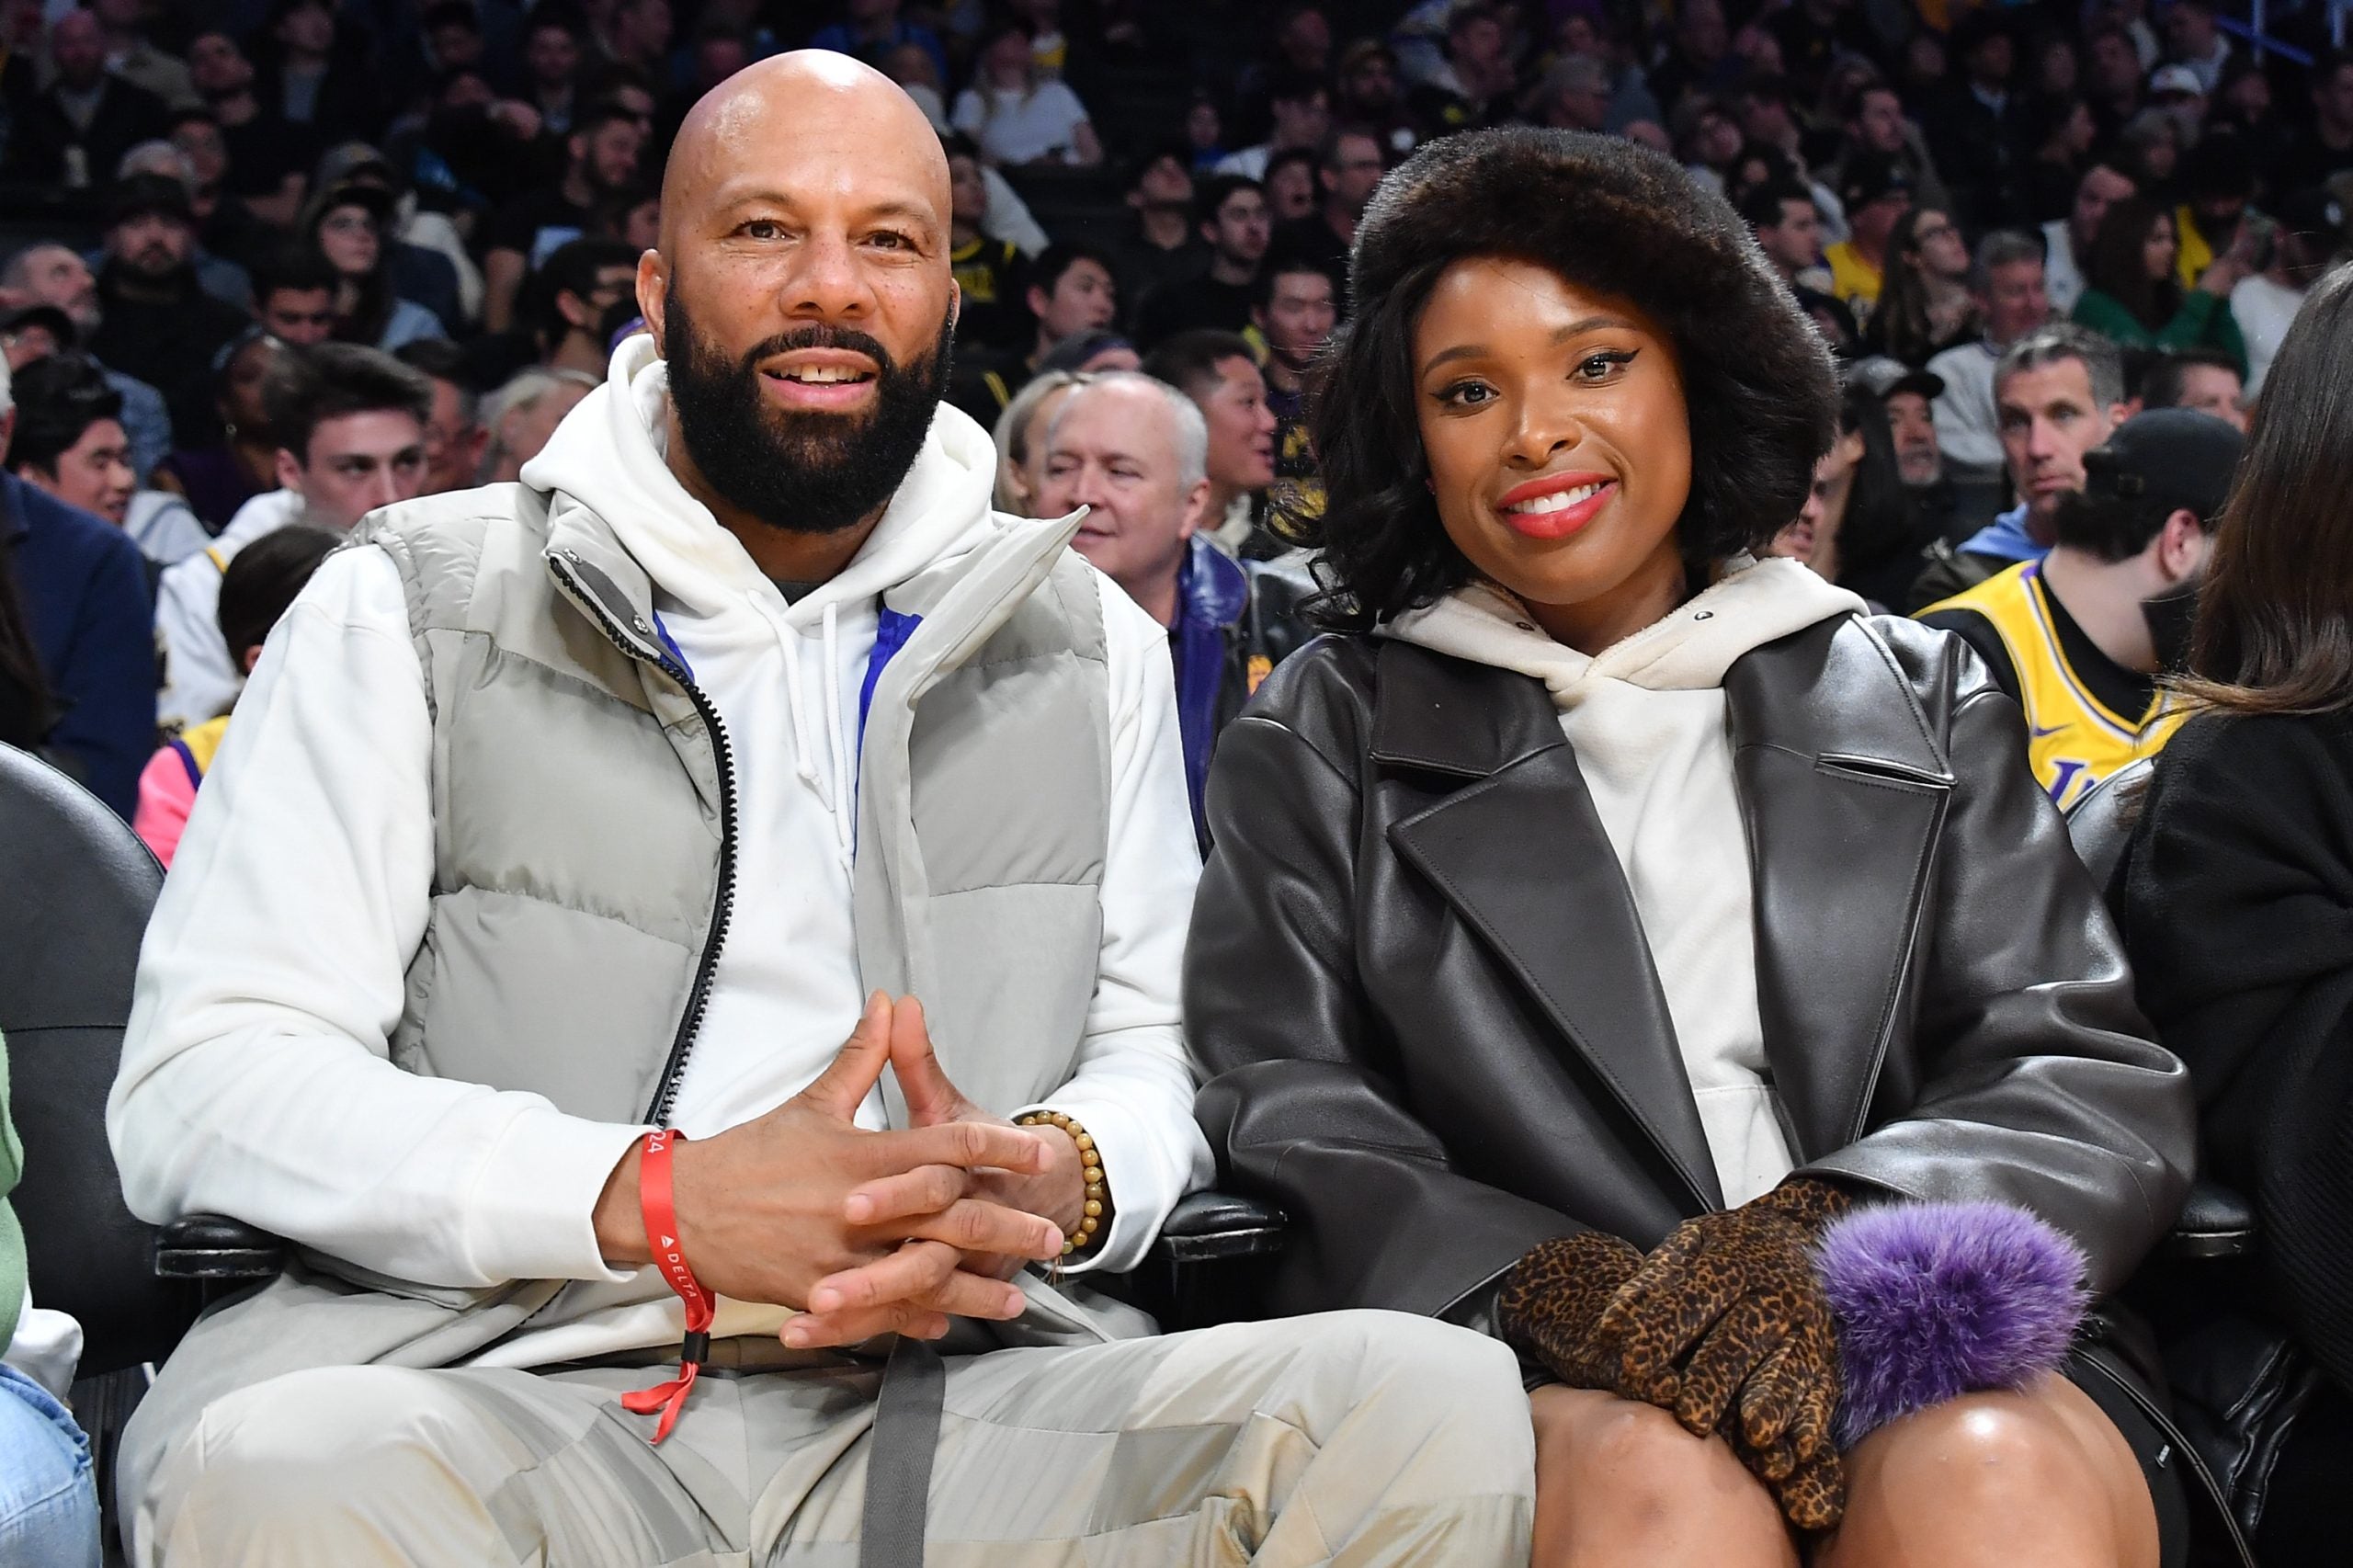 'This Relationship Is A Happy Place For Me': Common Gushes Over Jennifer Hudson While Speaking About His Love Life